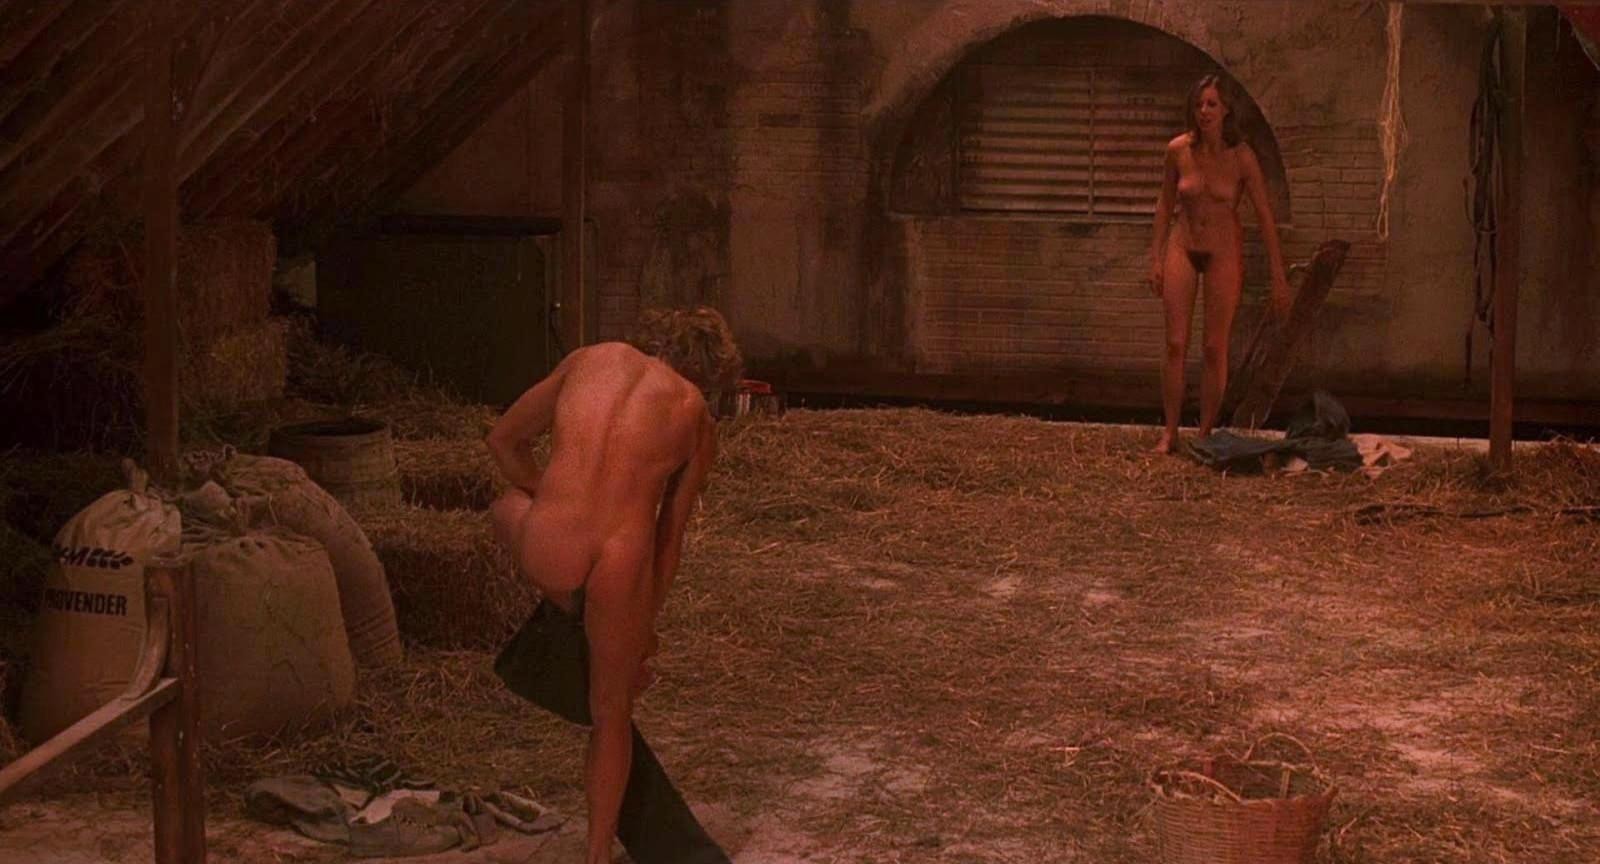 Peter Firth nudo in "Equus" (1977) .